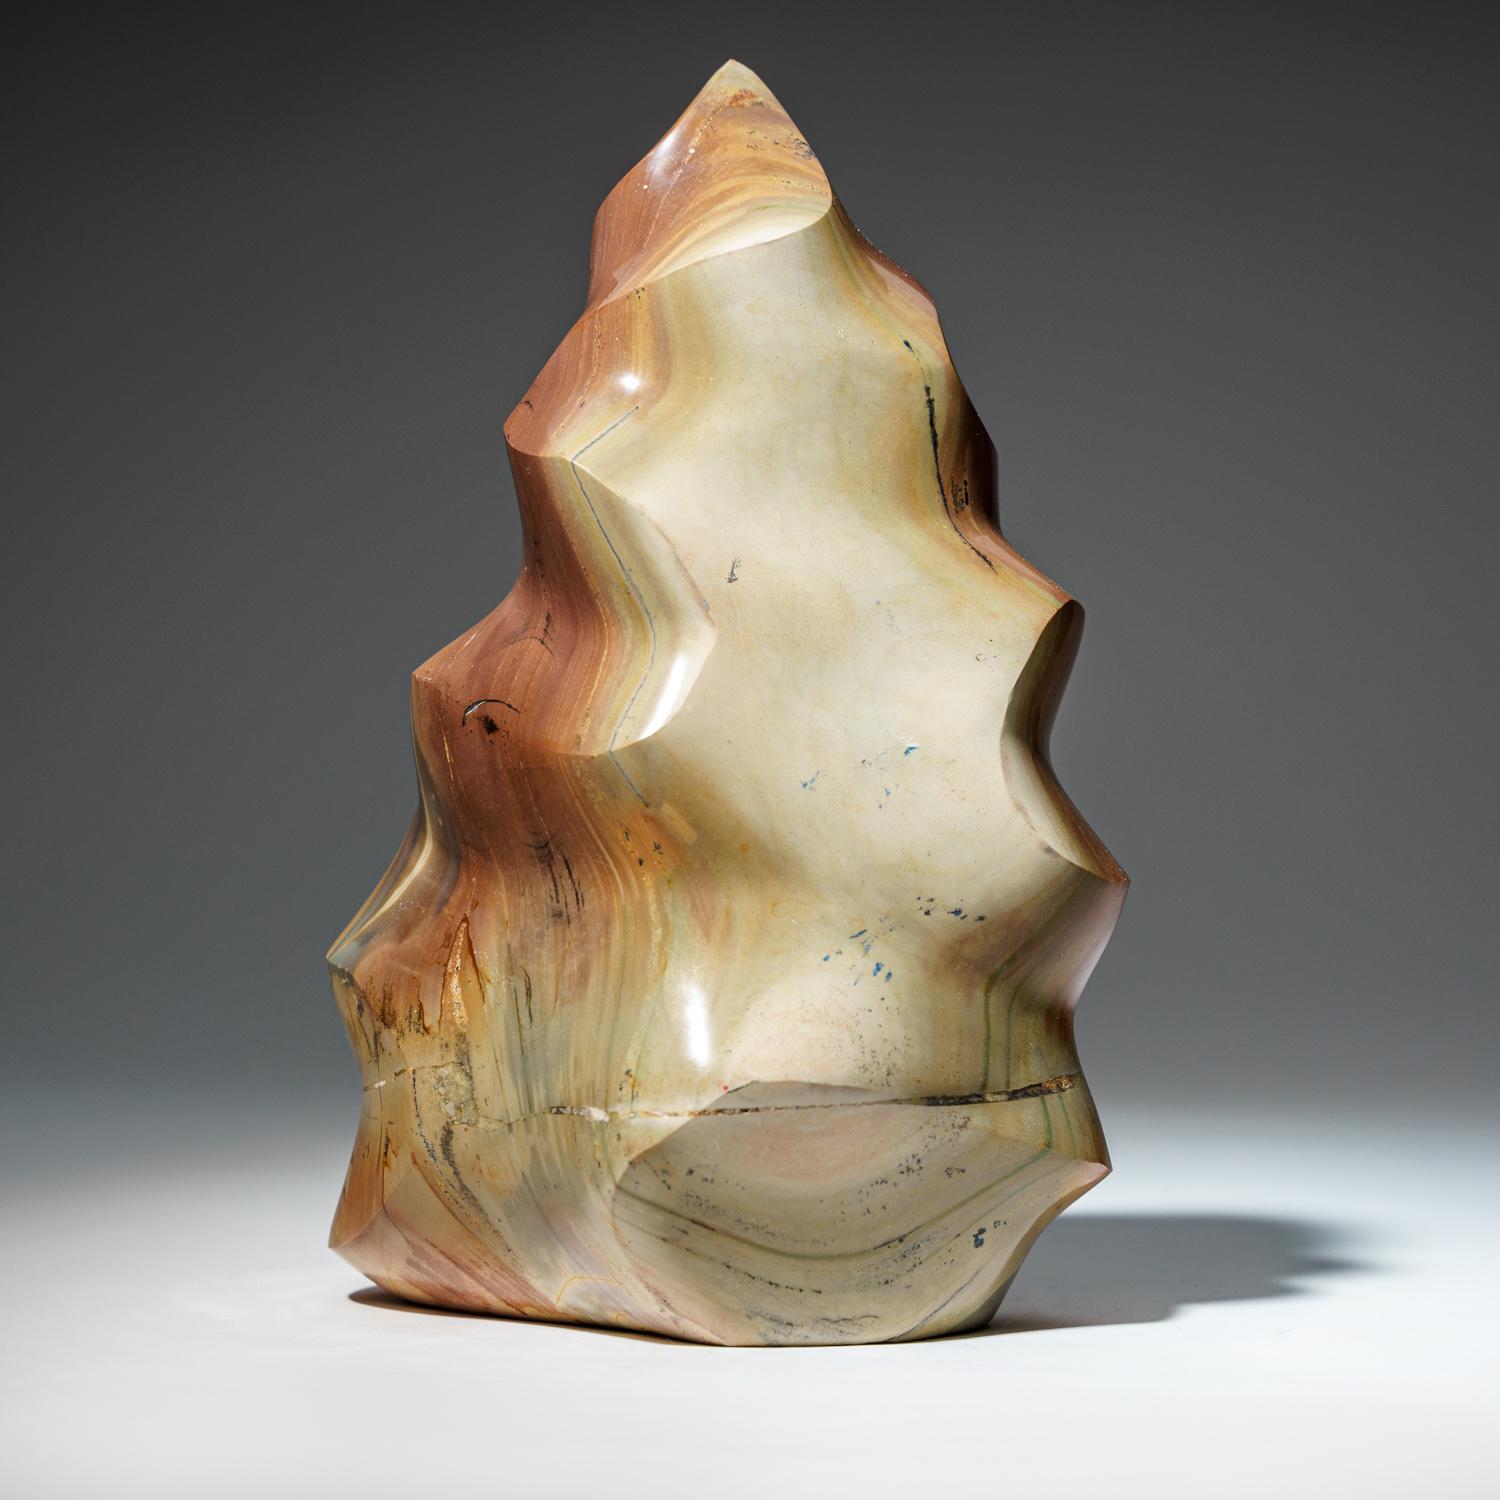 Contemporary Polished Polychrome Freeform from Madagascar (6.3 lbs) For Sale